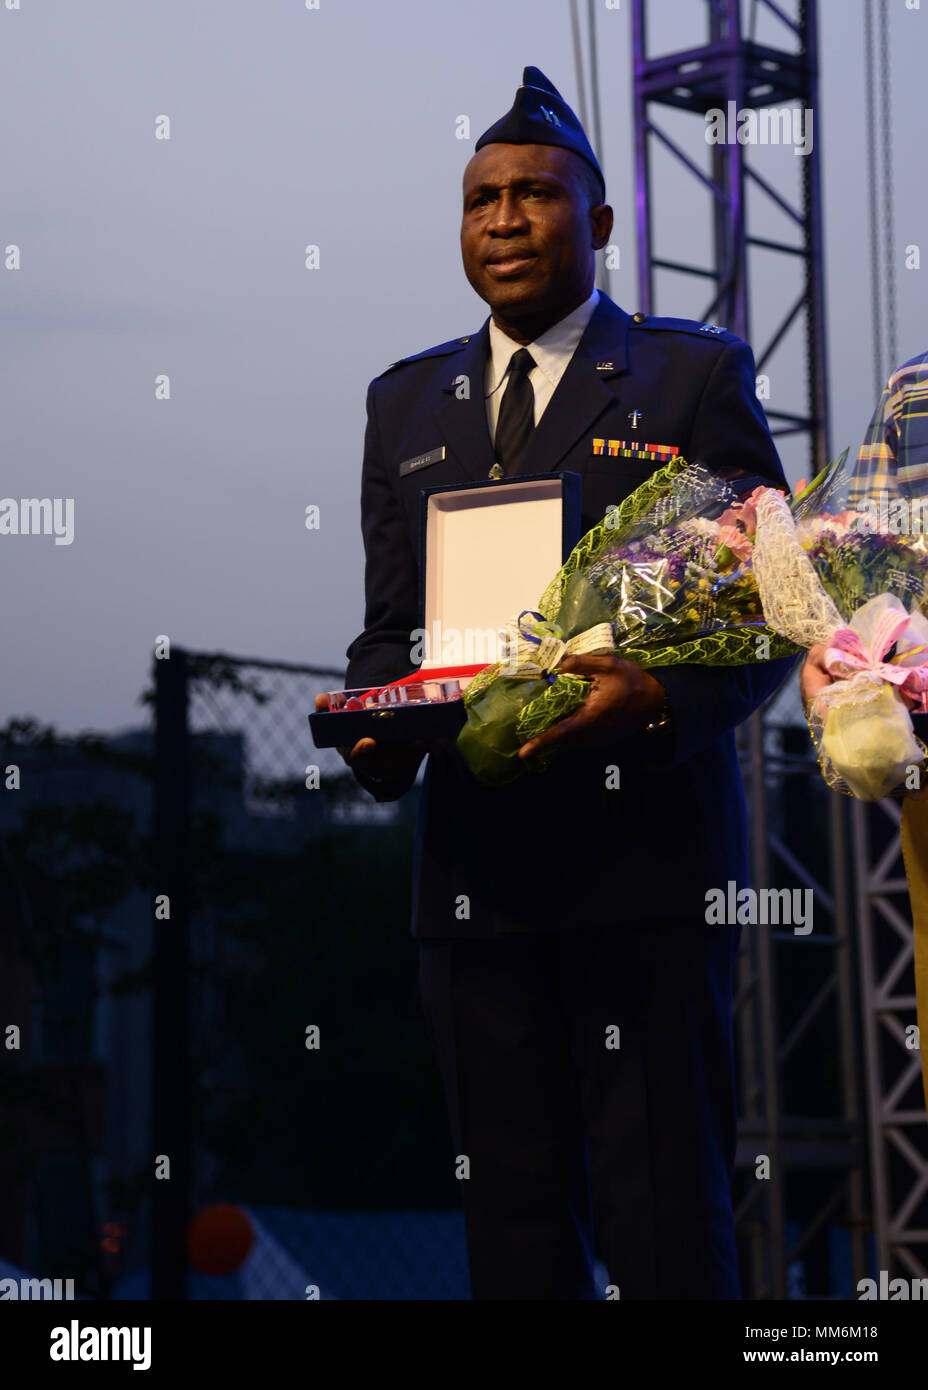 U.S. Air Force Capt. Joseph Idomele, 51st Fighter Wing chaplain receives an award during the 14th Annual Korean American Cultural Friendship Festival near Osan Air Base, September 9, 2017. The festival celebrates both Korean and Americans who strive to make the local community a great place to live. (U.S. Air Force photo by Staff Sgt. Tinese Jackson) Stock Photo